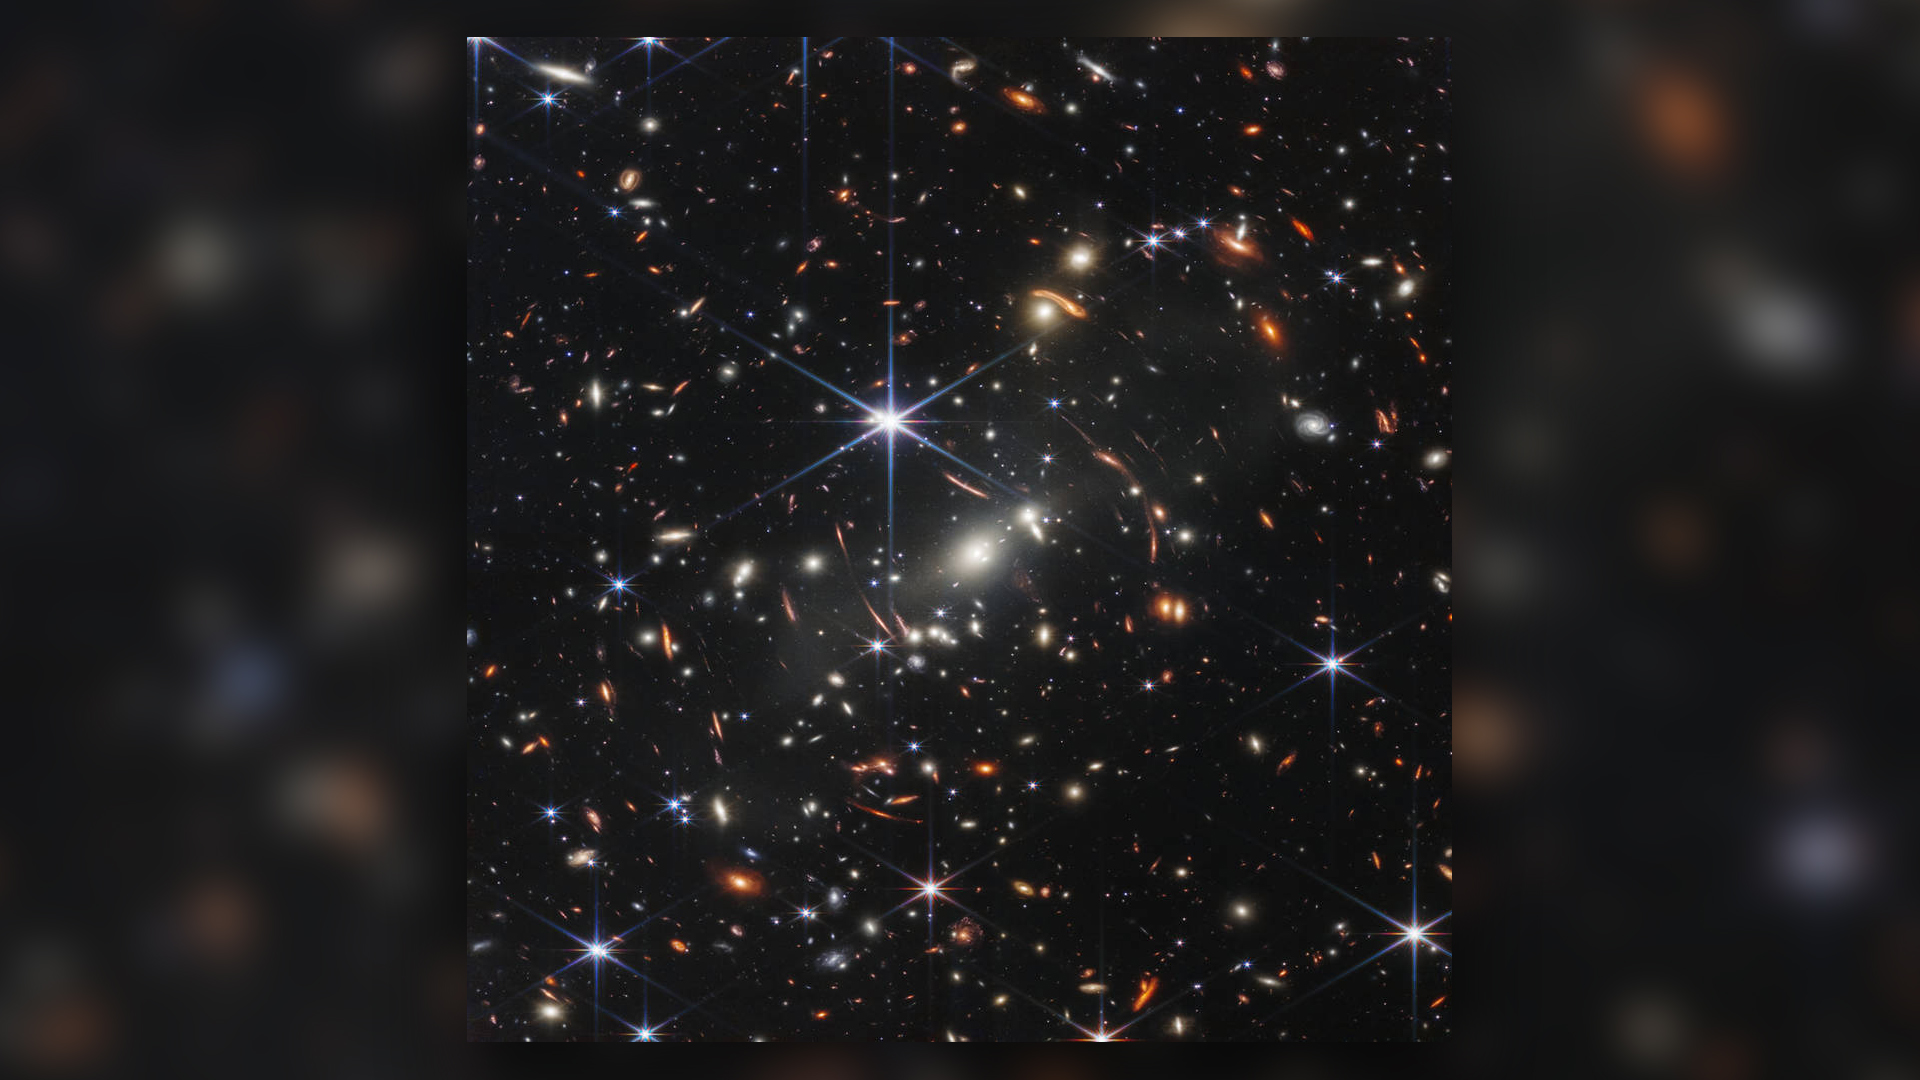 NASA's James Webb Space Telescope has captured the deepest, sharpest infrared image of the distant Universe yet.  This image of galaxy cluster SMACS 0723, known as Webb's first deep field, is packed with detail.